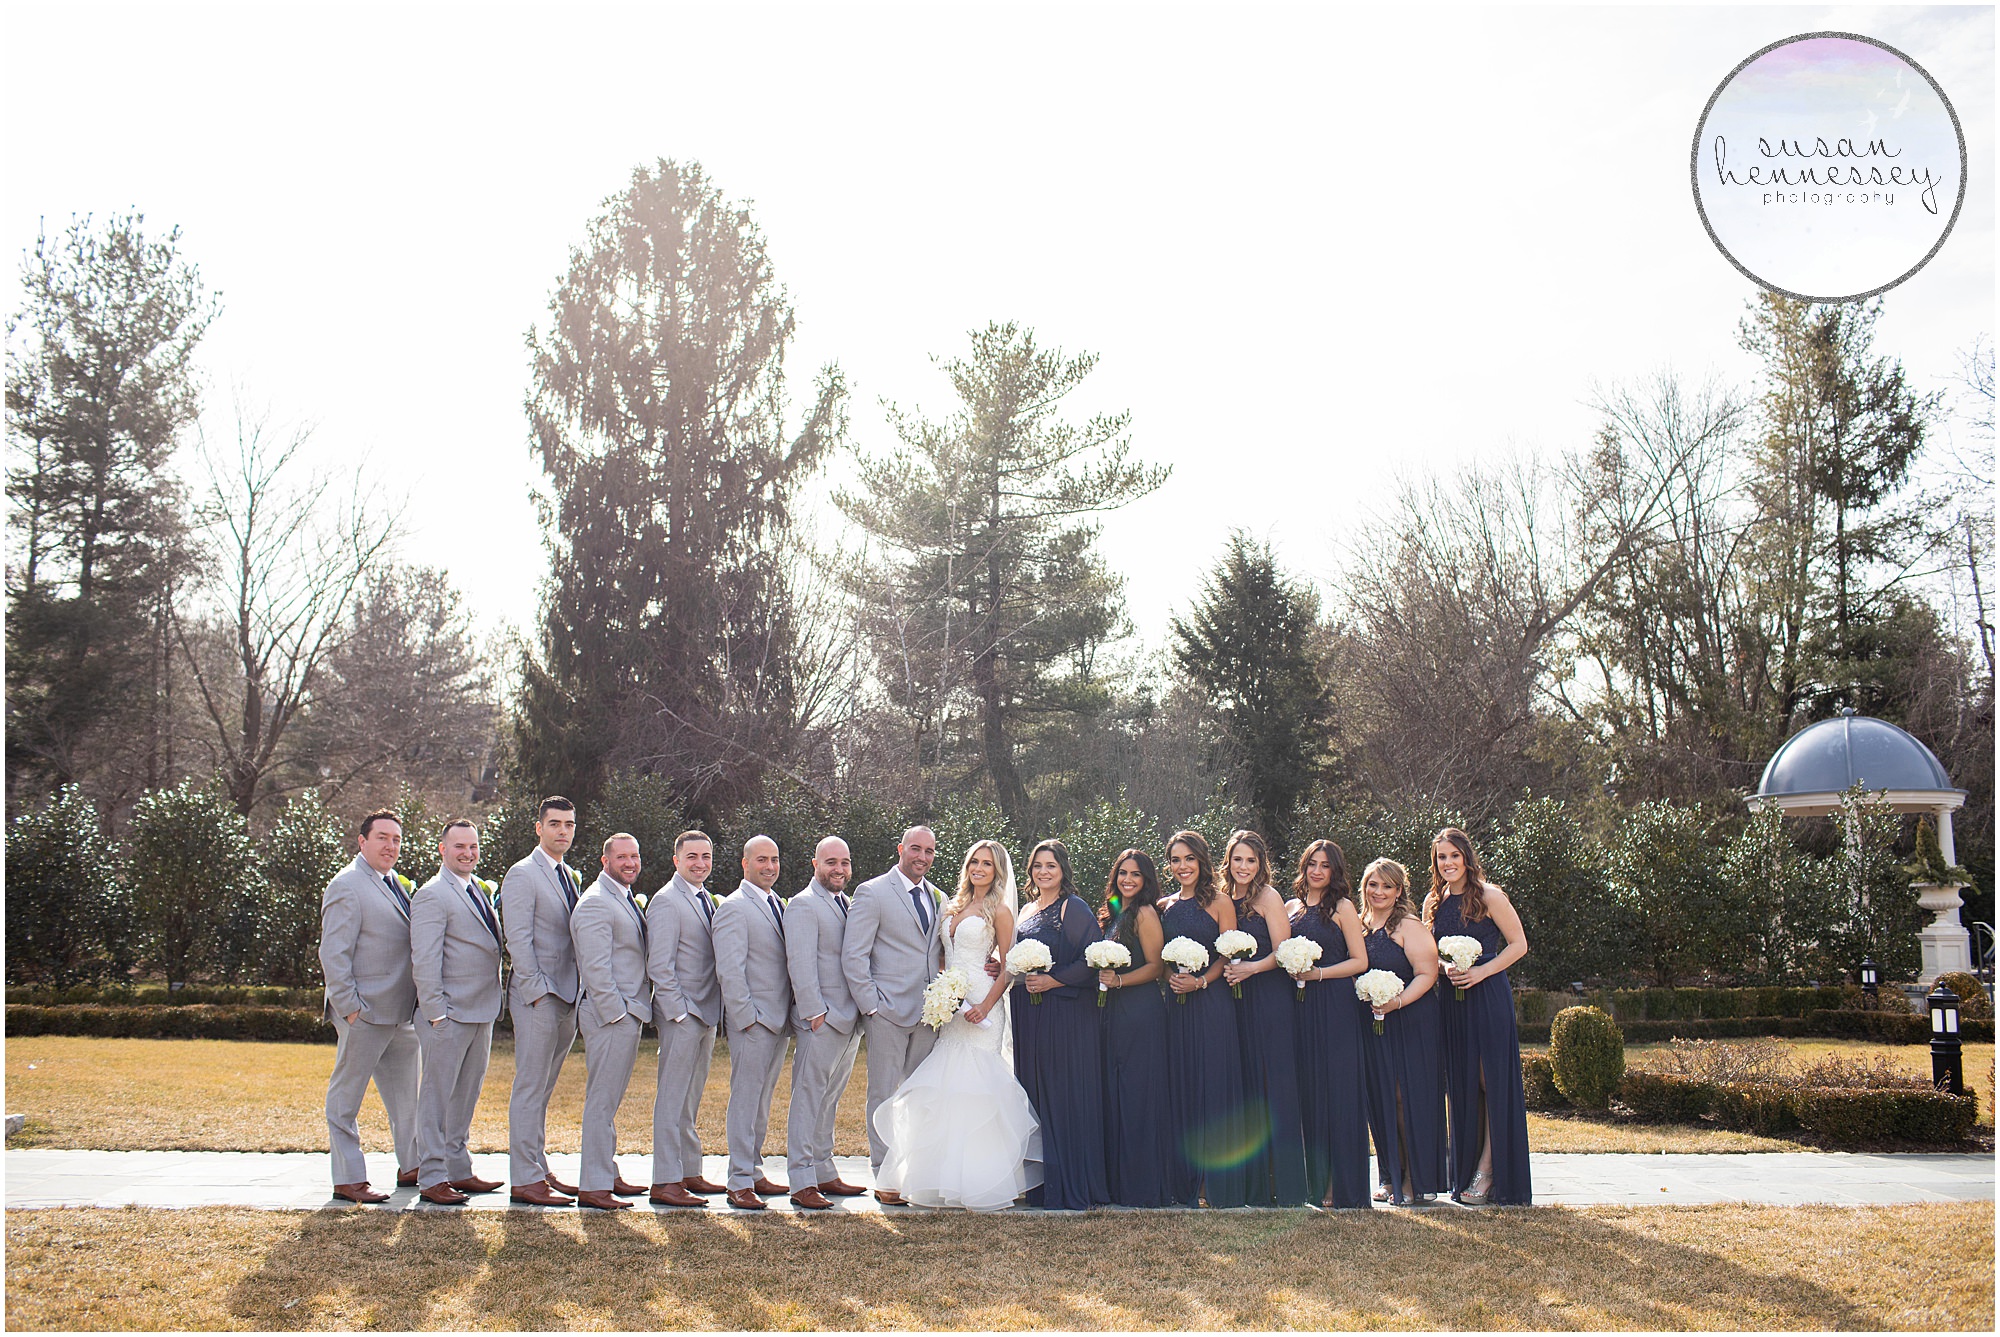 bridal party photo with groomsmen and bridesmaids 